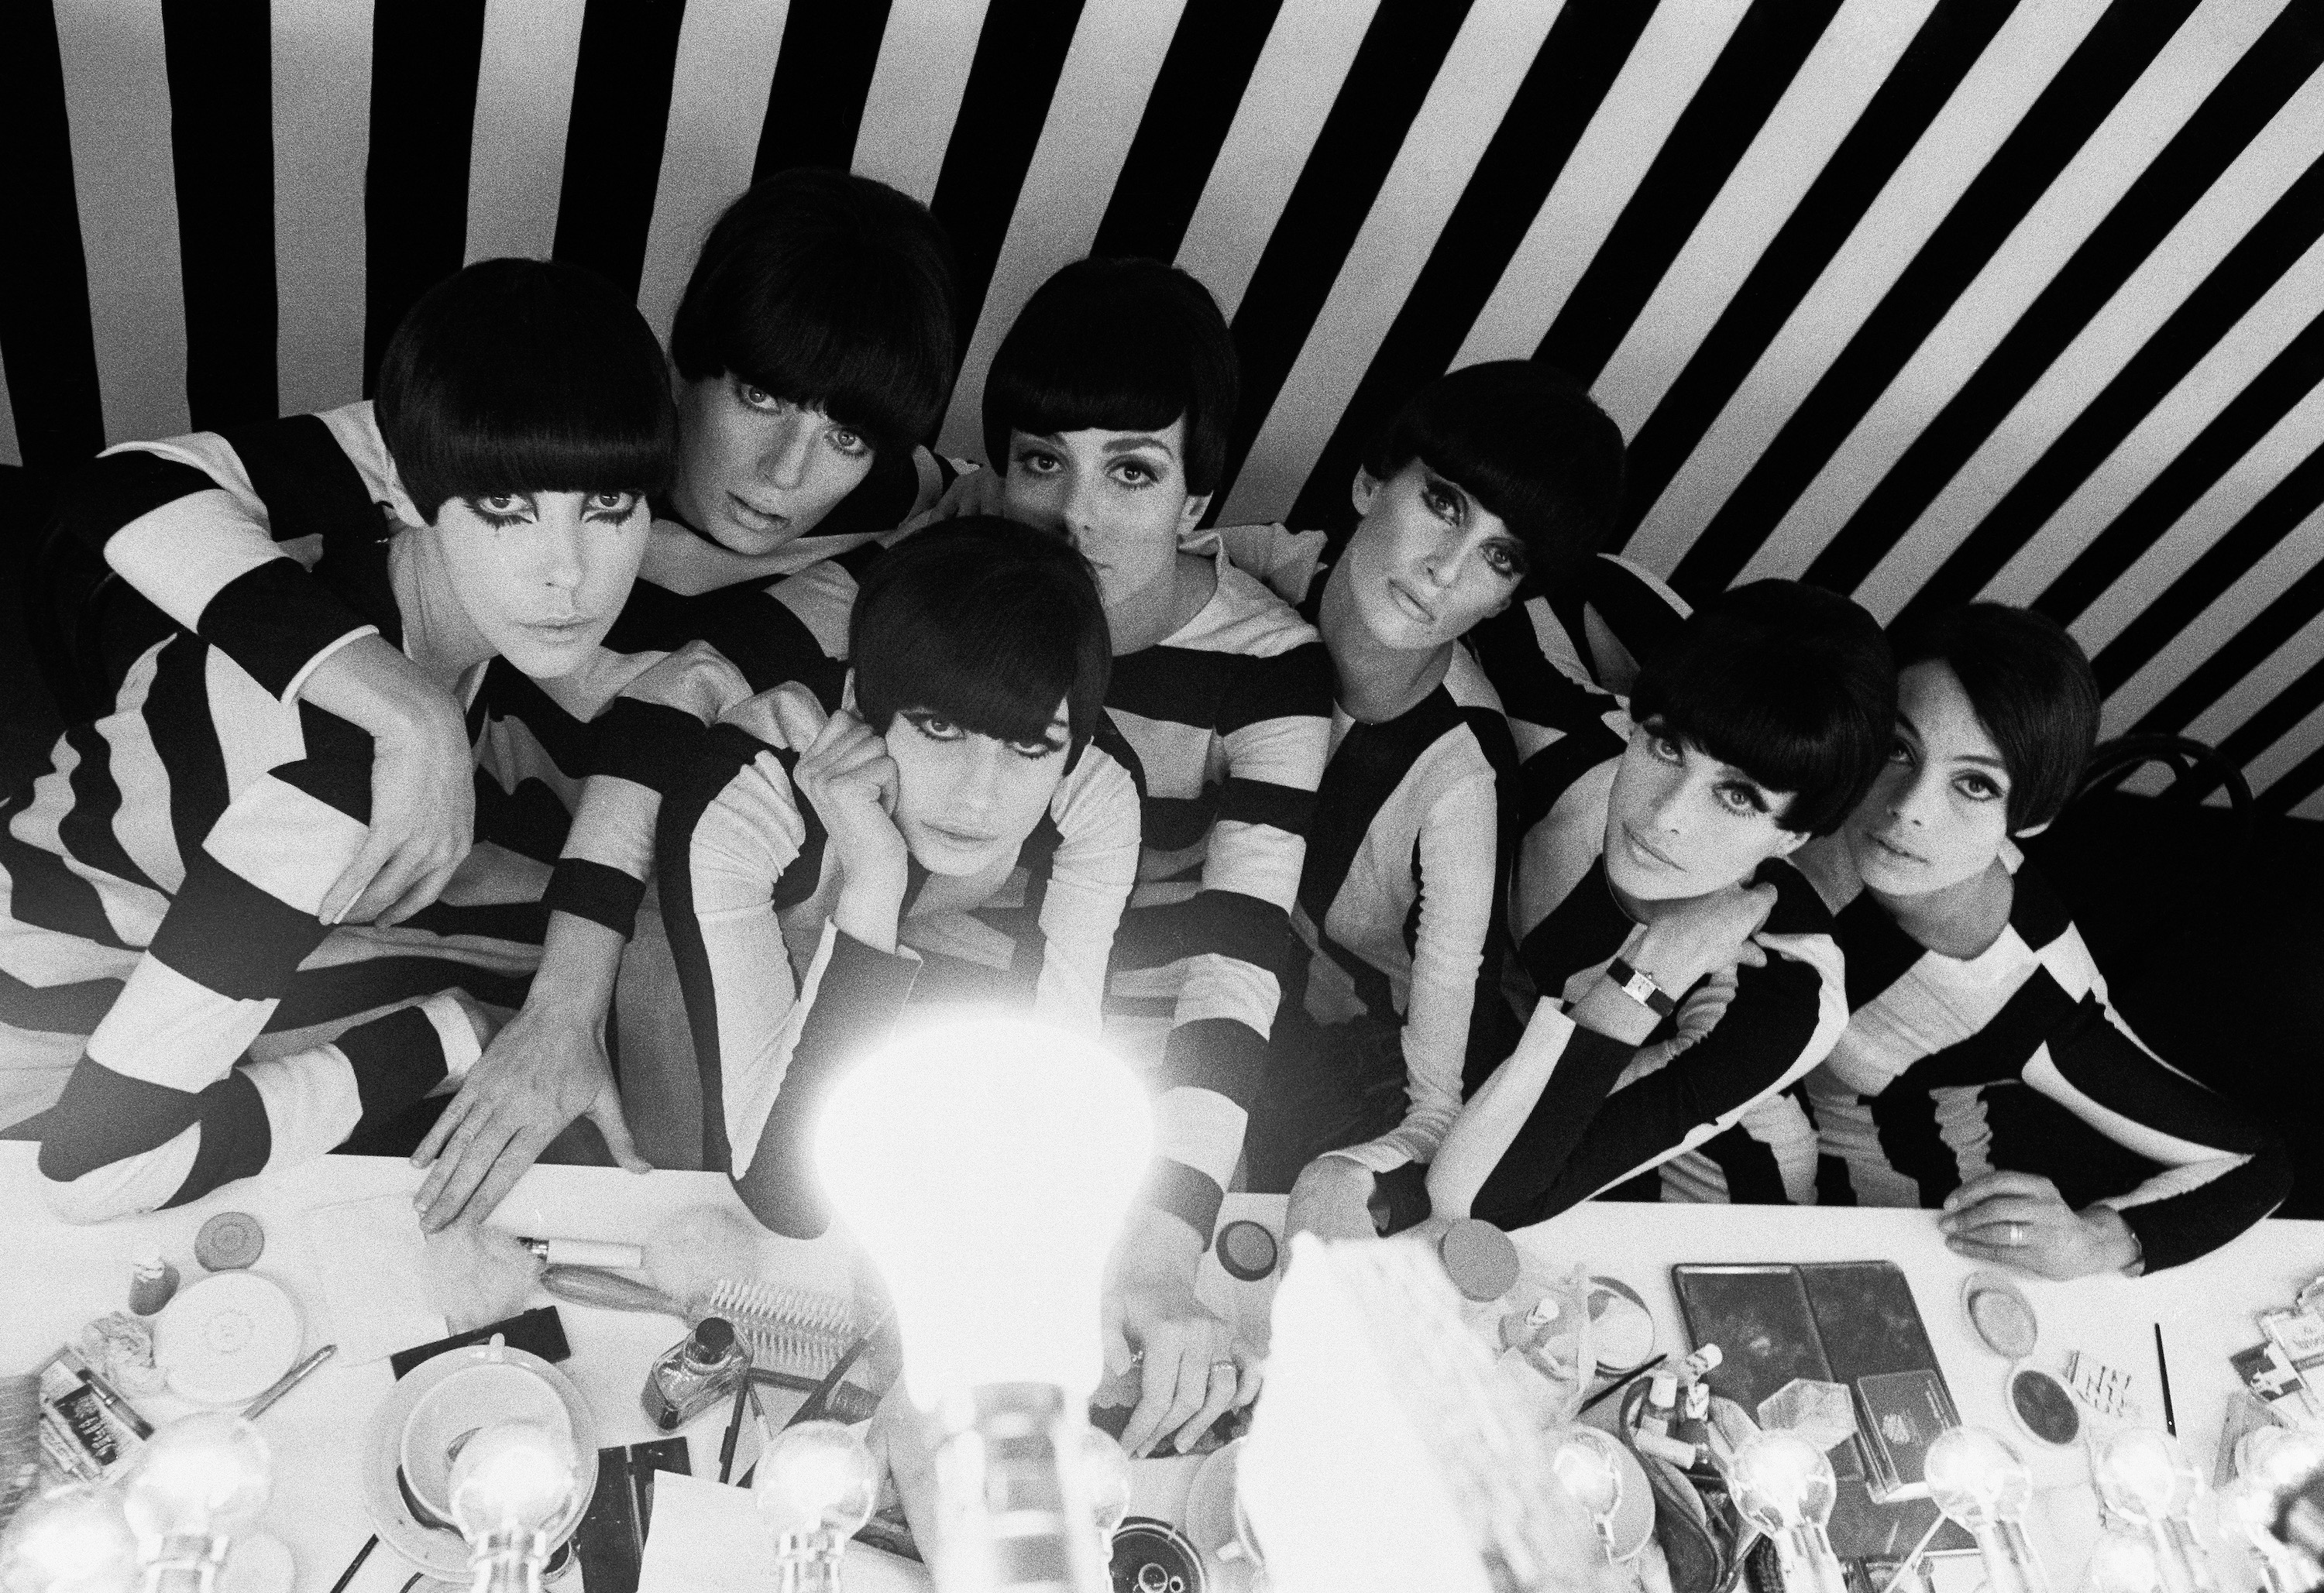 Black-and-white photo of models in striped tops posing at a makeup table